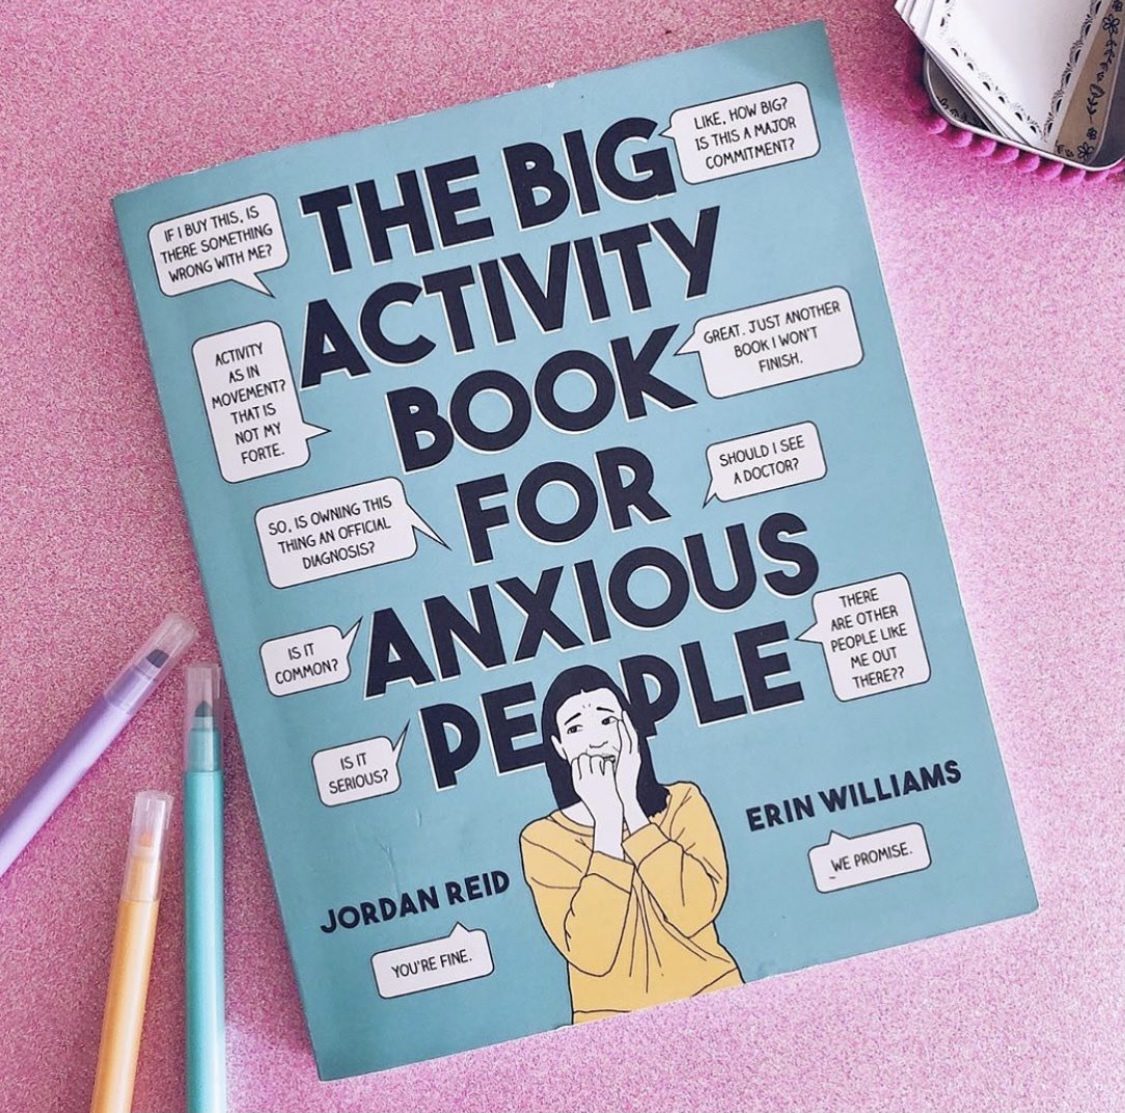 The Big Activity Book for Anxious People, by Jordan Reid